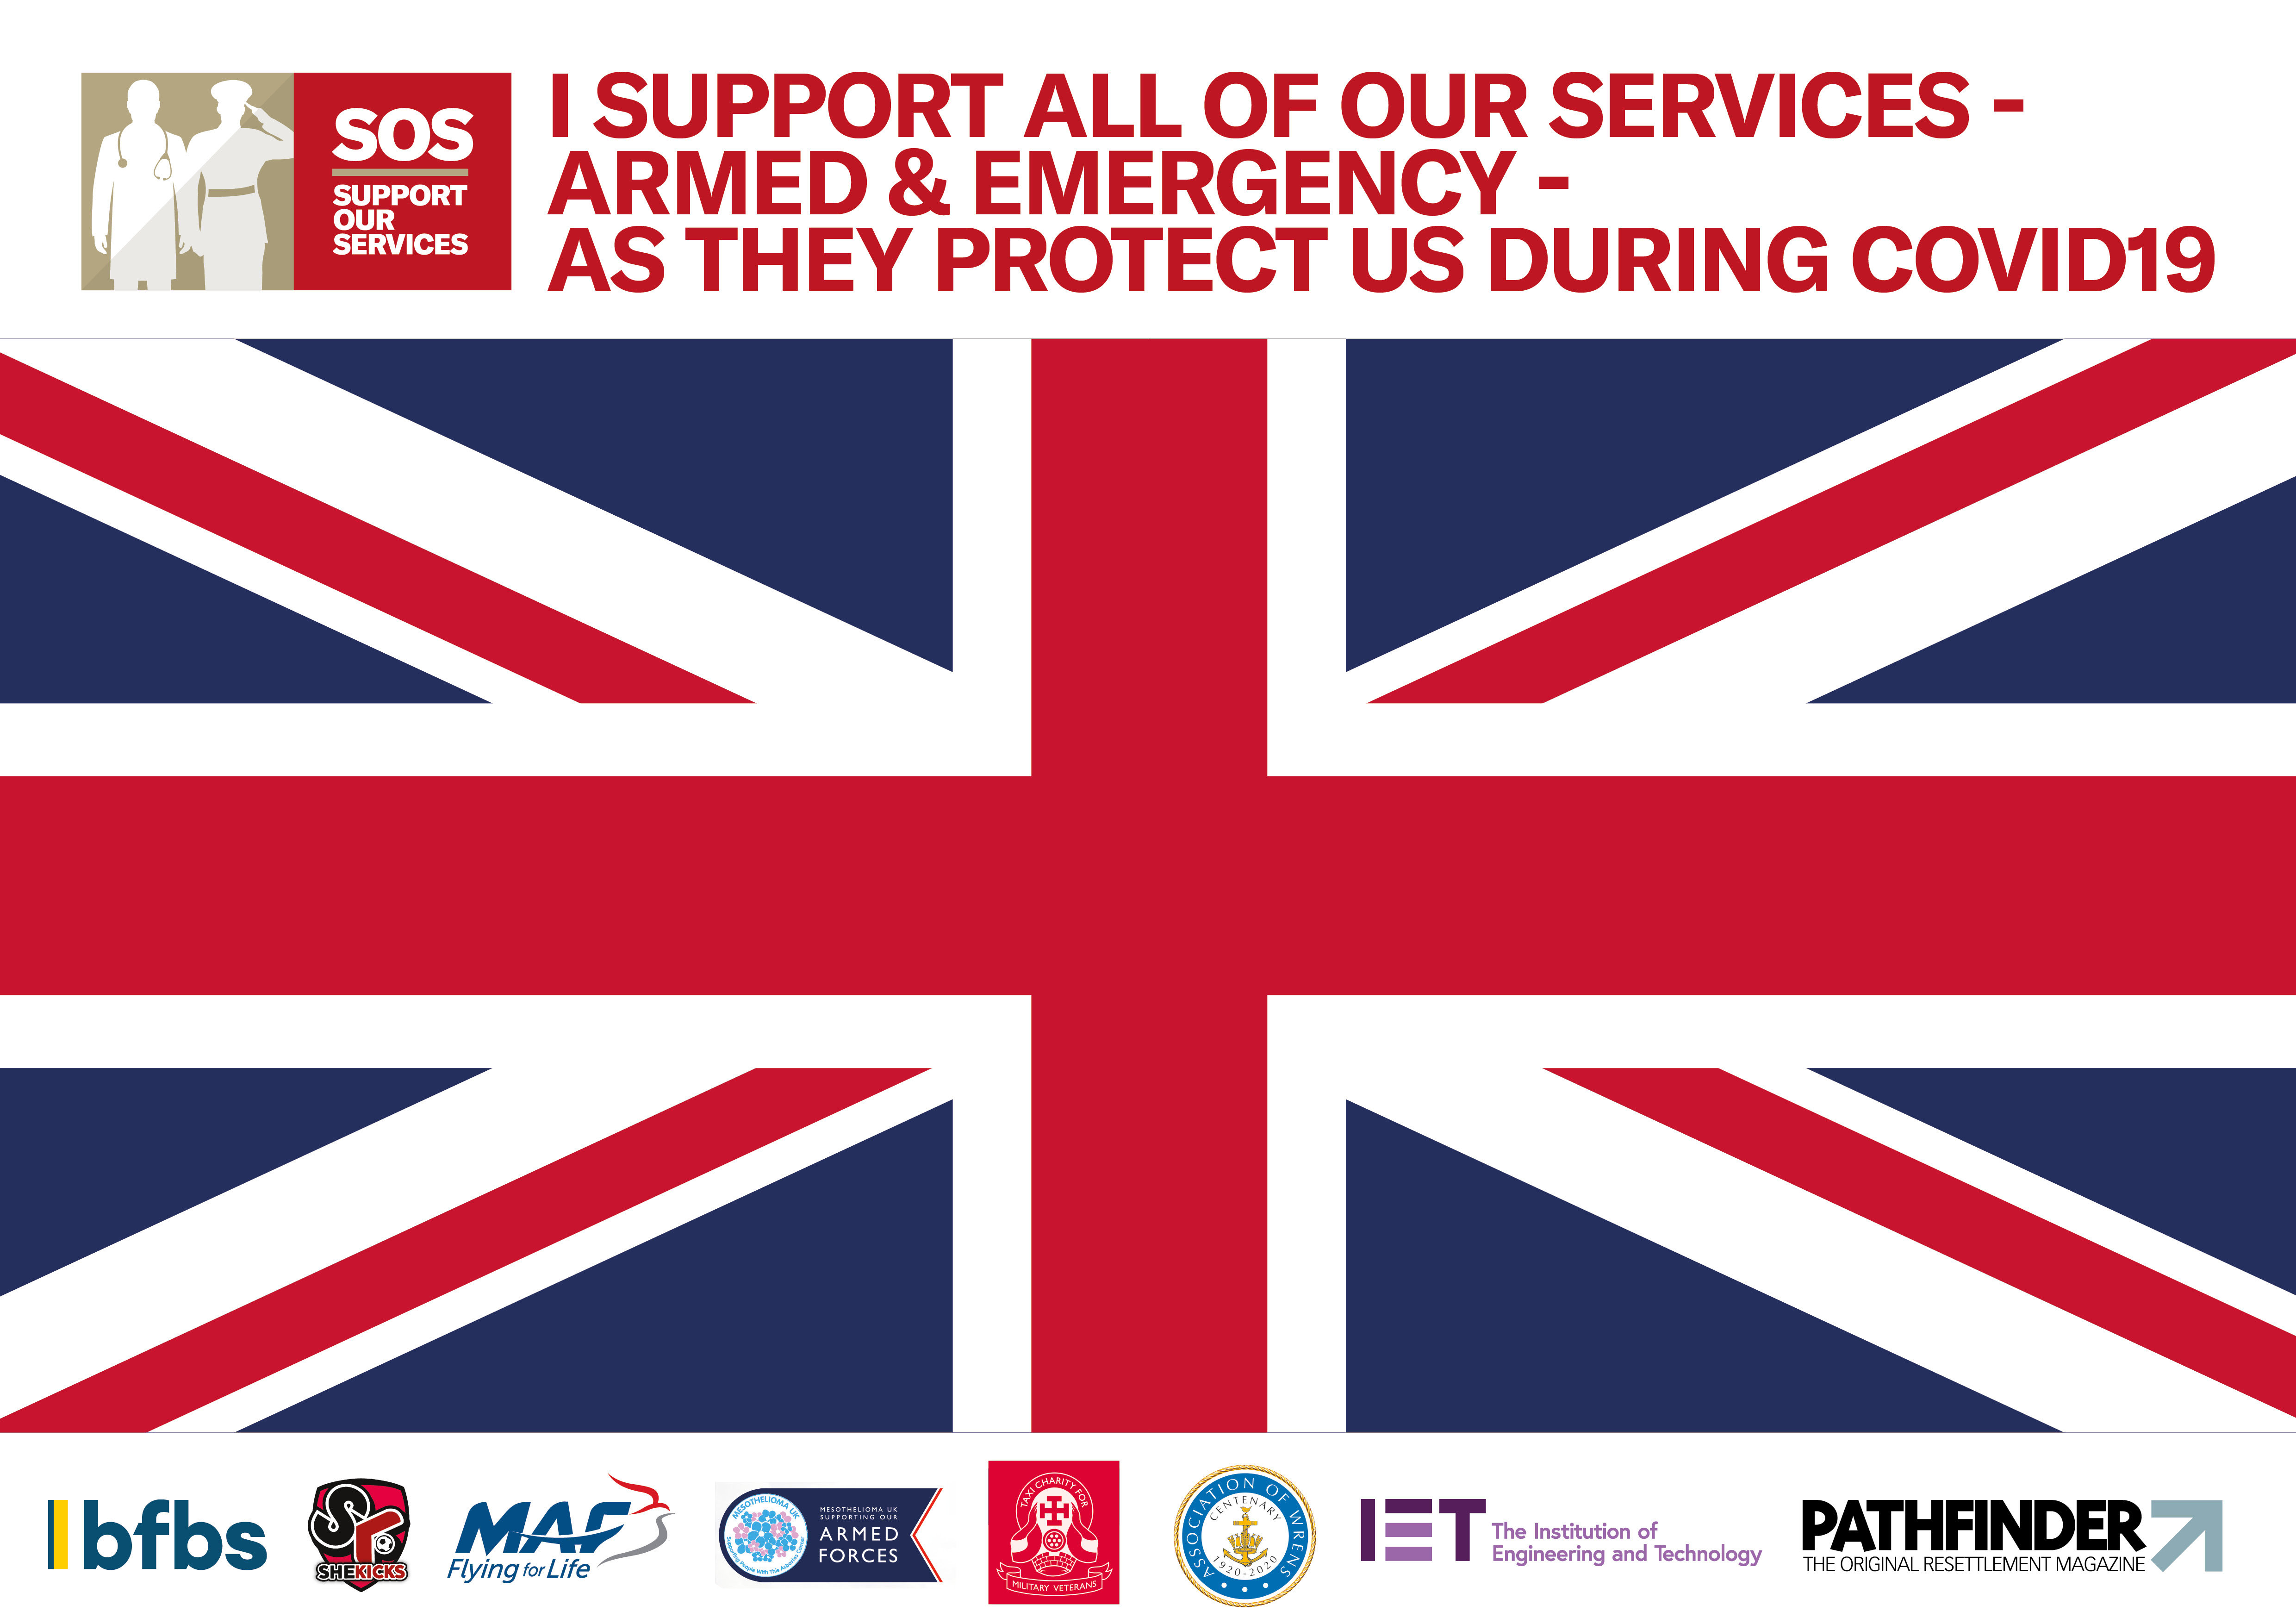 Have You Got The Free VE Day Special Of Pathfinder Yet & Support Our Services On May 8?